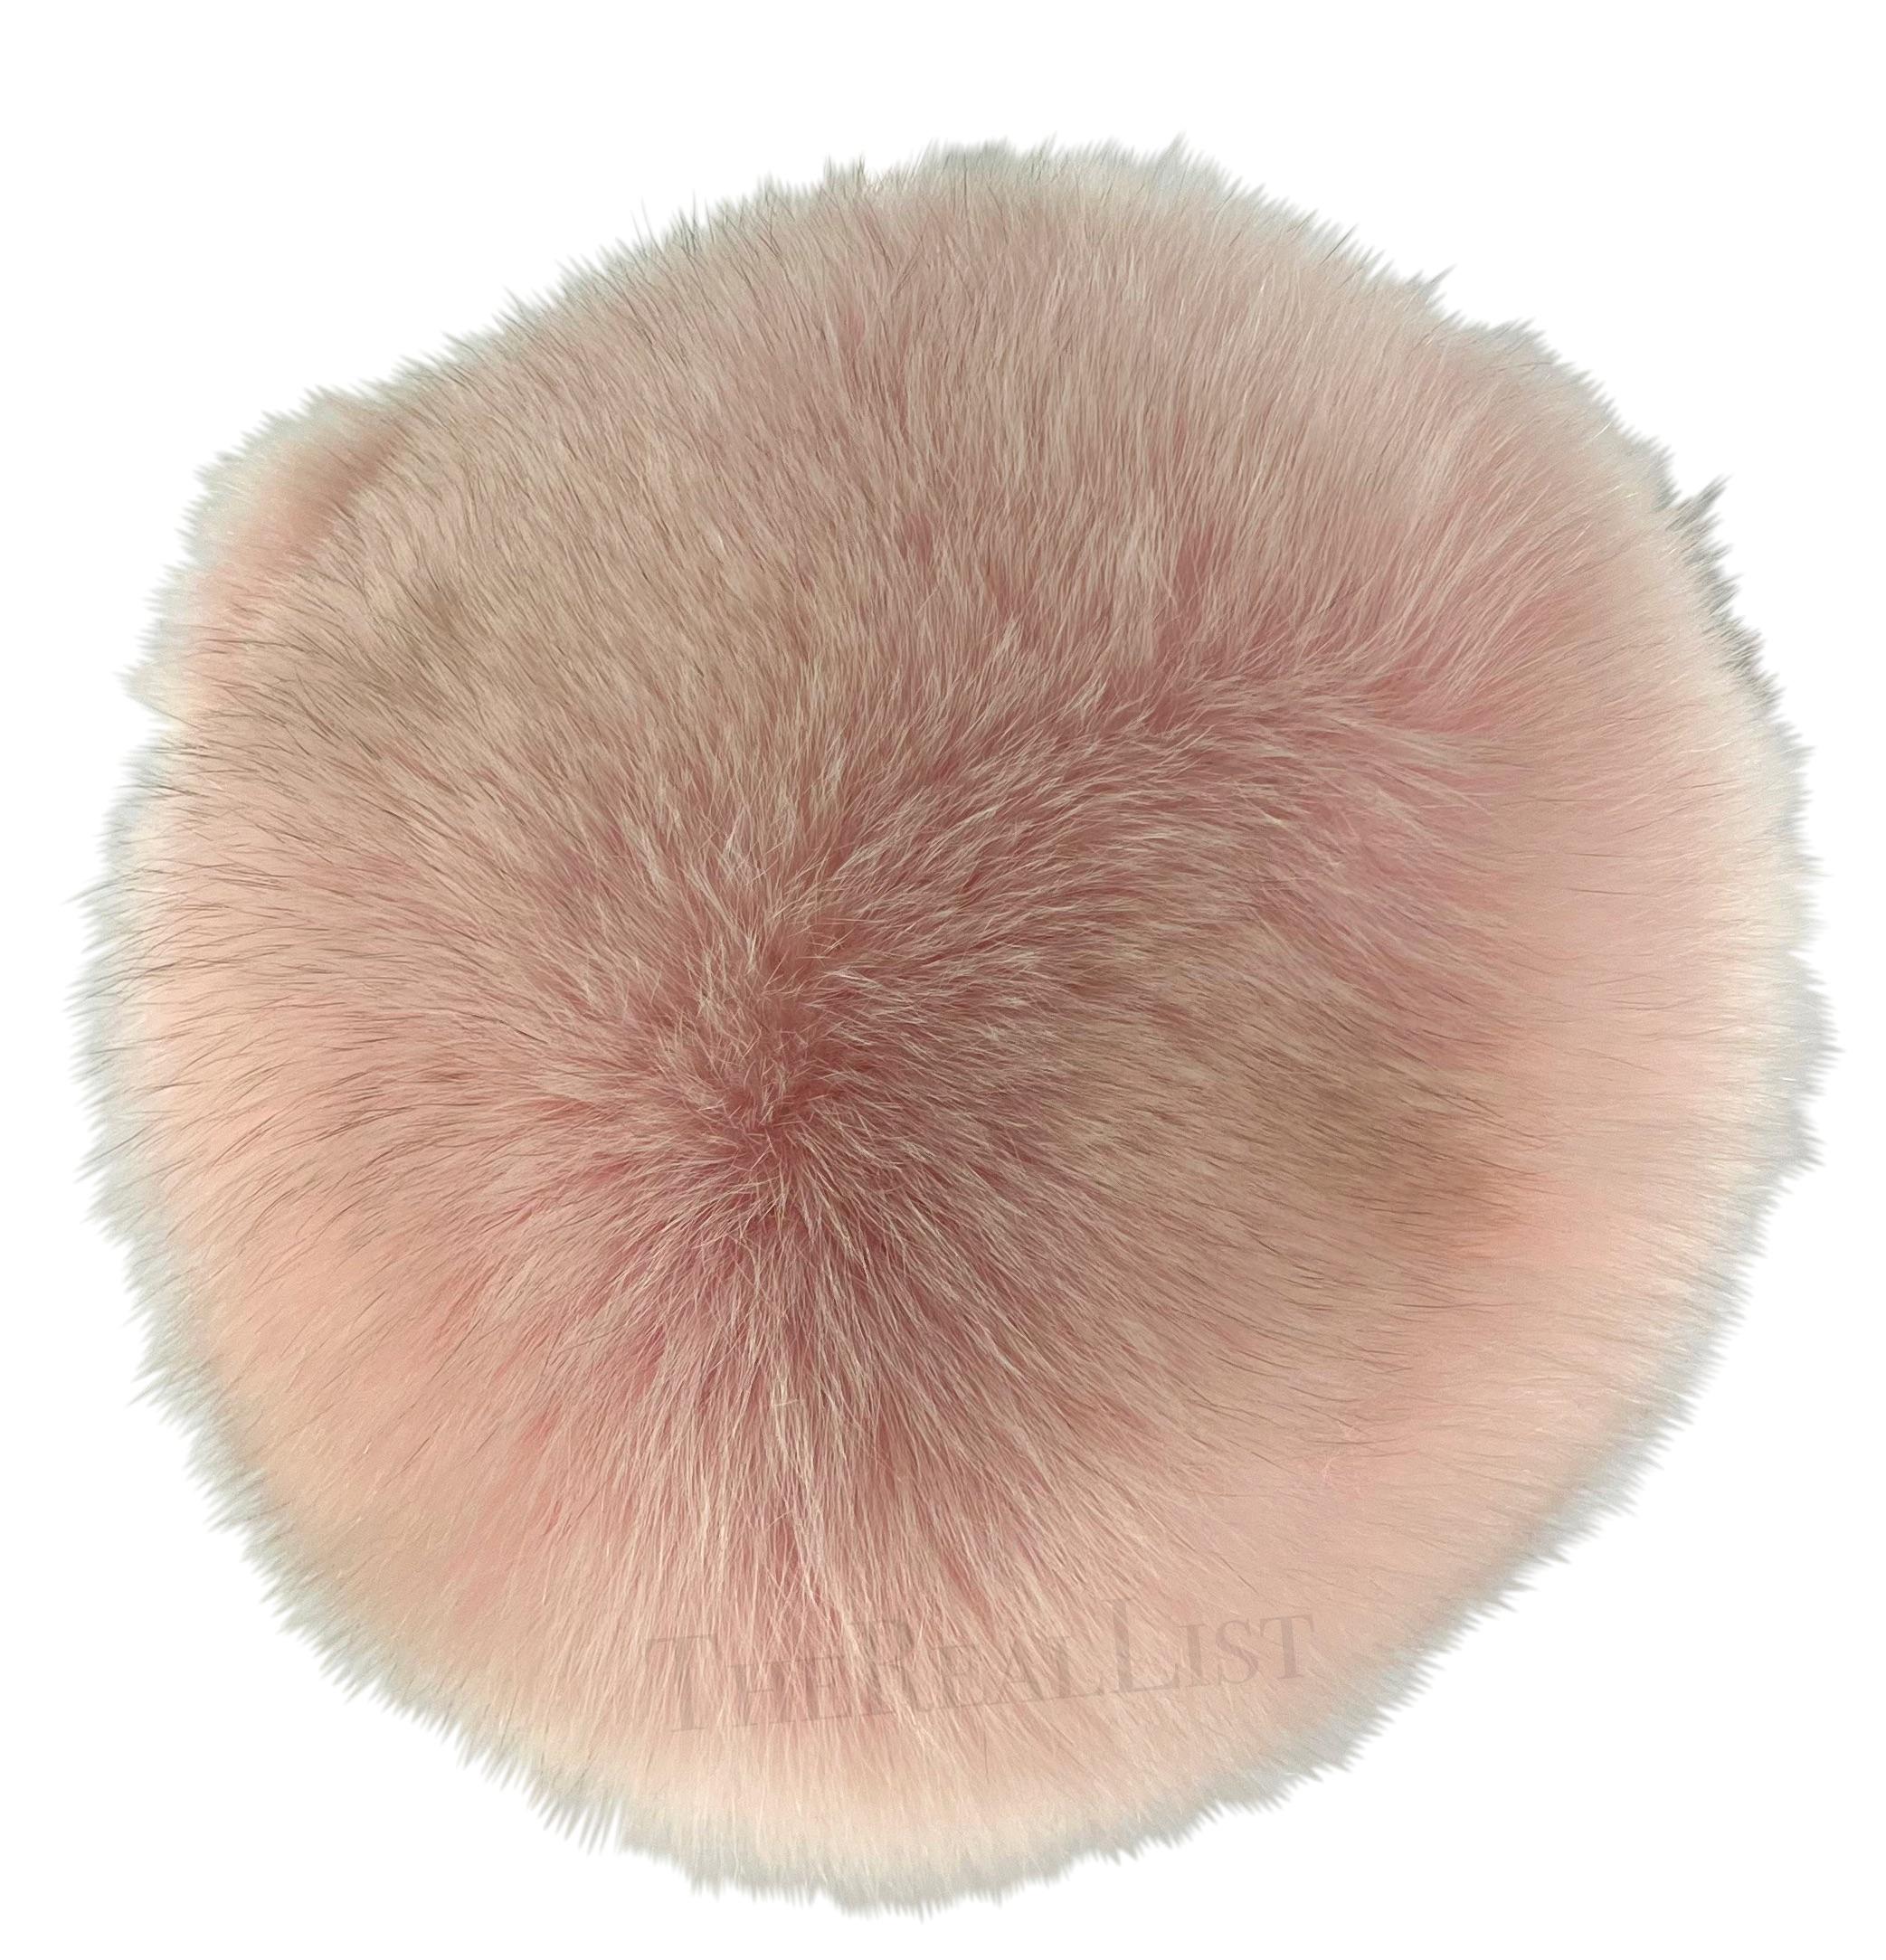 Early 2000s Burberry Pink Fox Fur Pill Box Hat In Excellent Condition For Sale In West Hollywood, CA